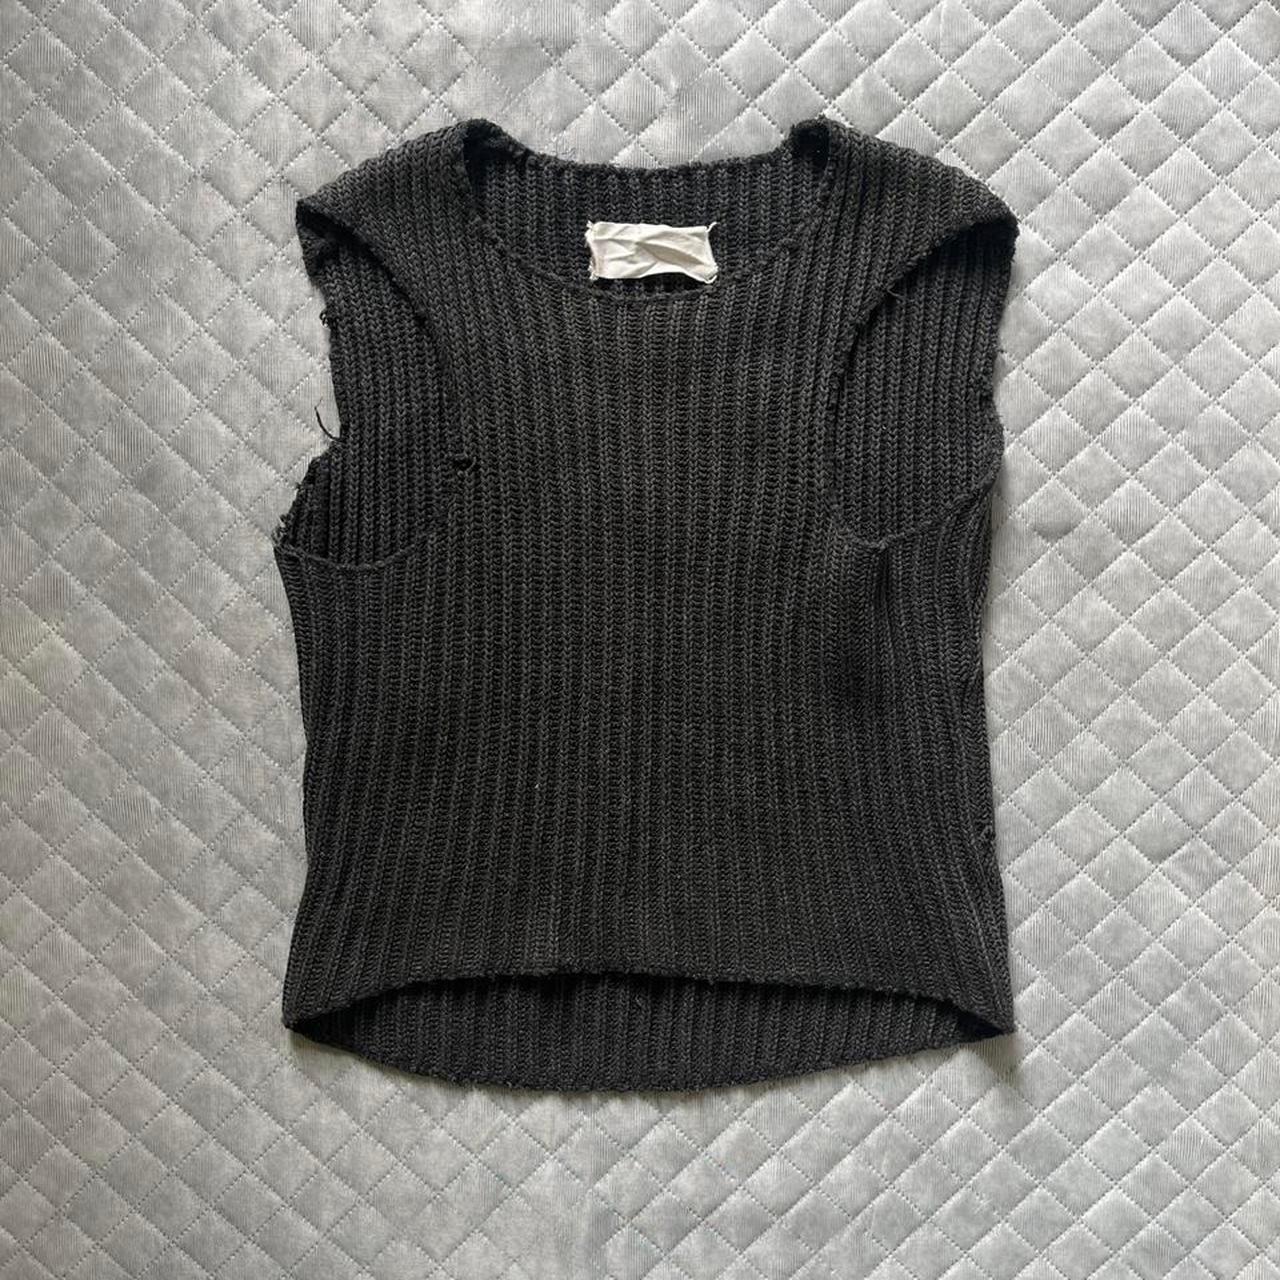 Martin Margiela AW1998 Flat Collection Knitted Vest For Sale 1